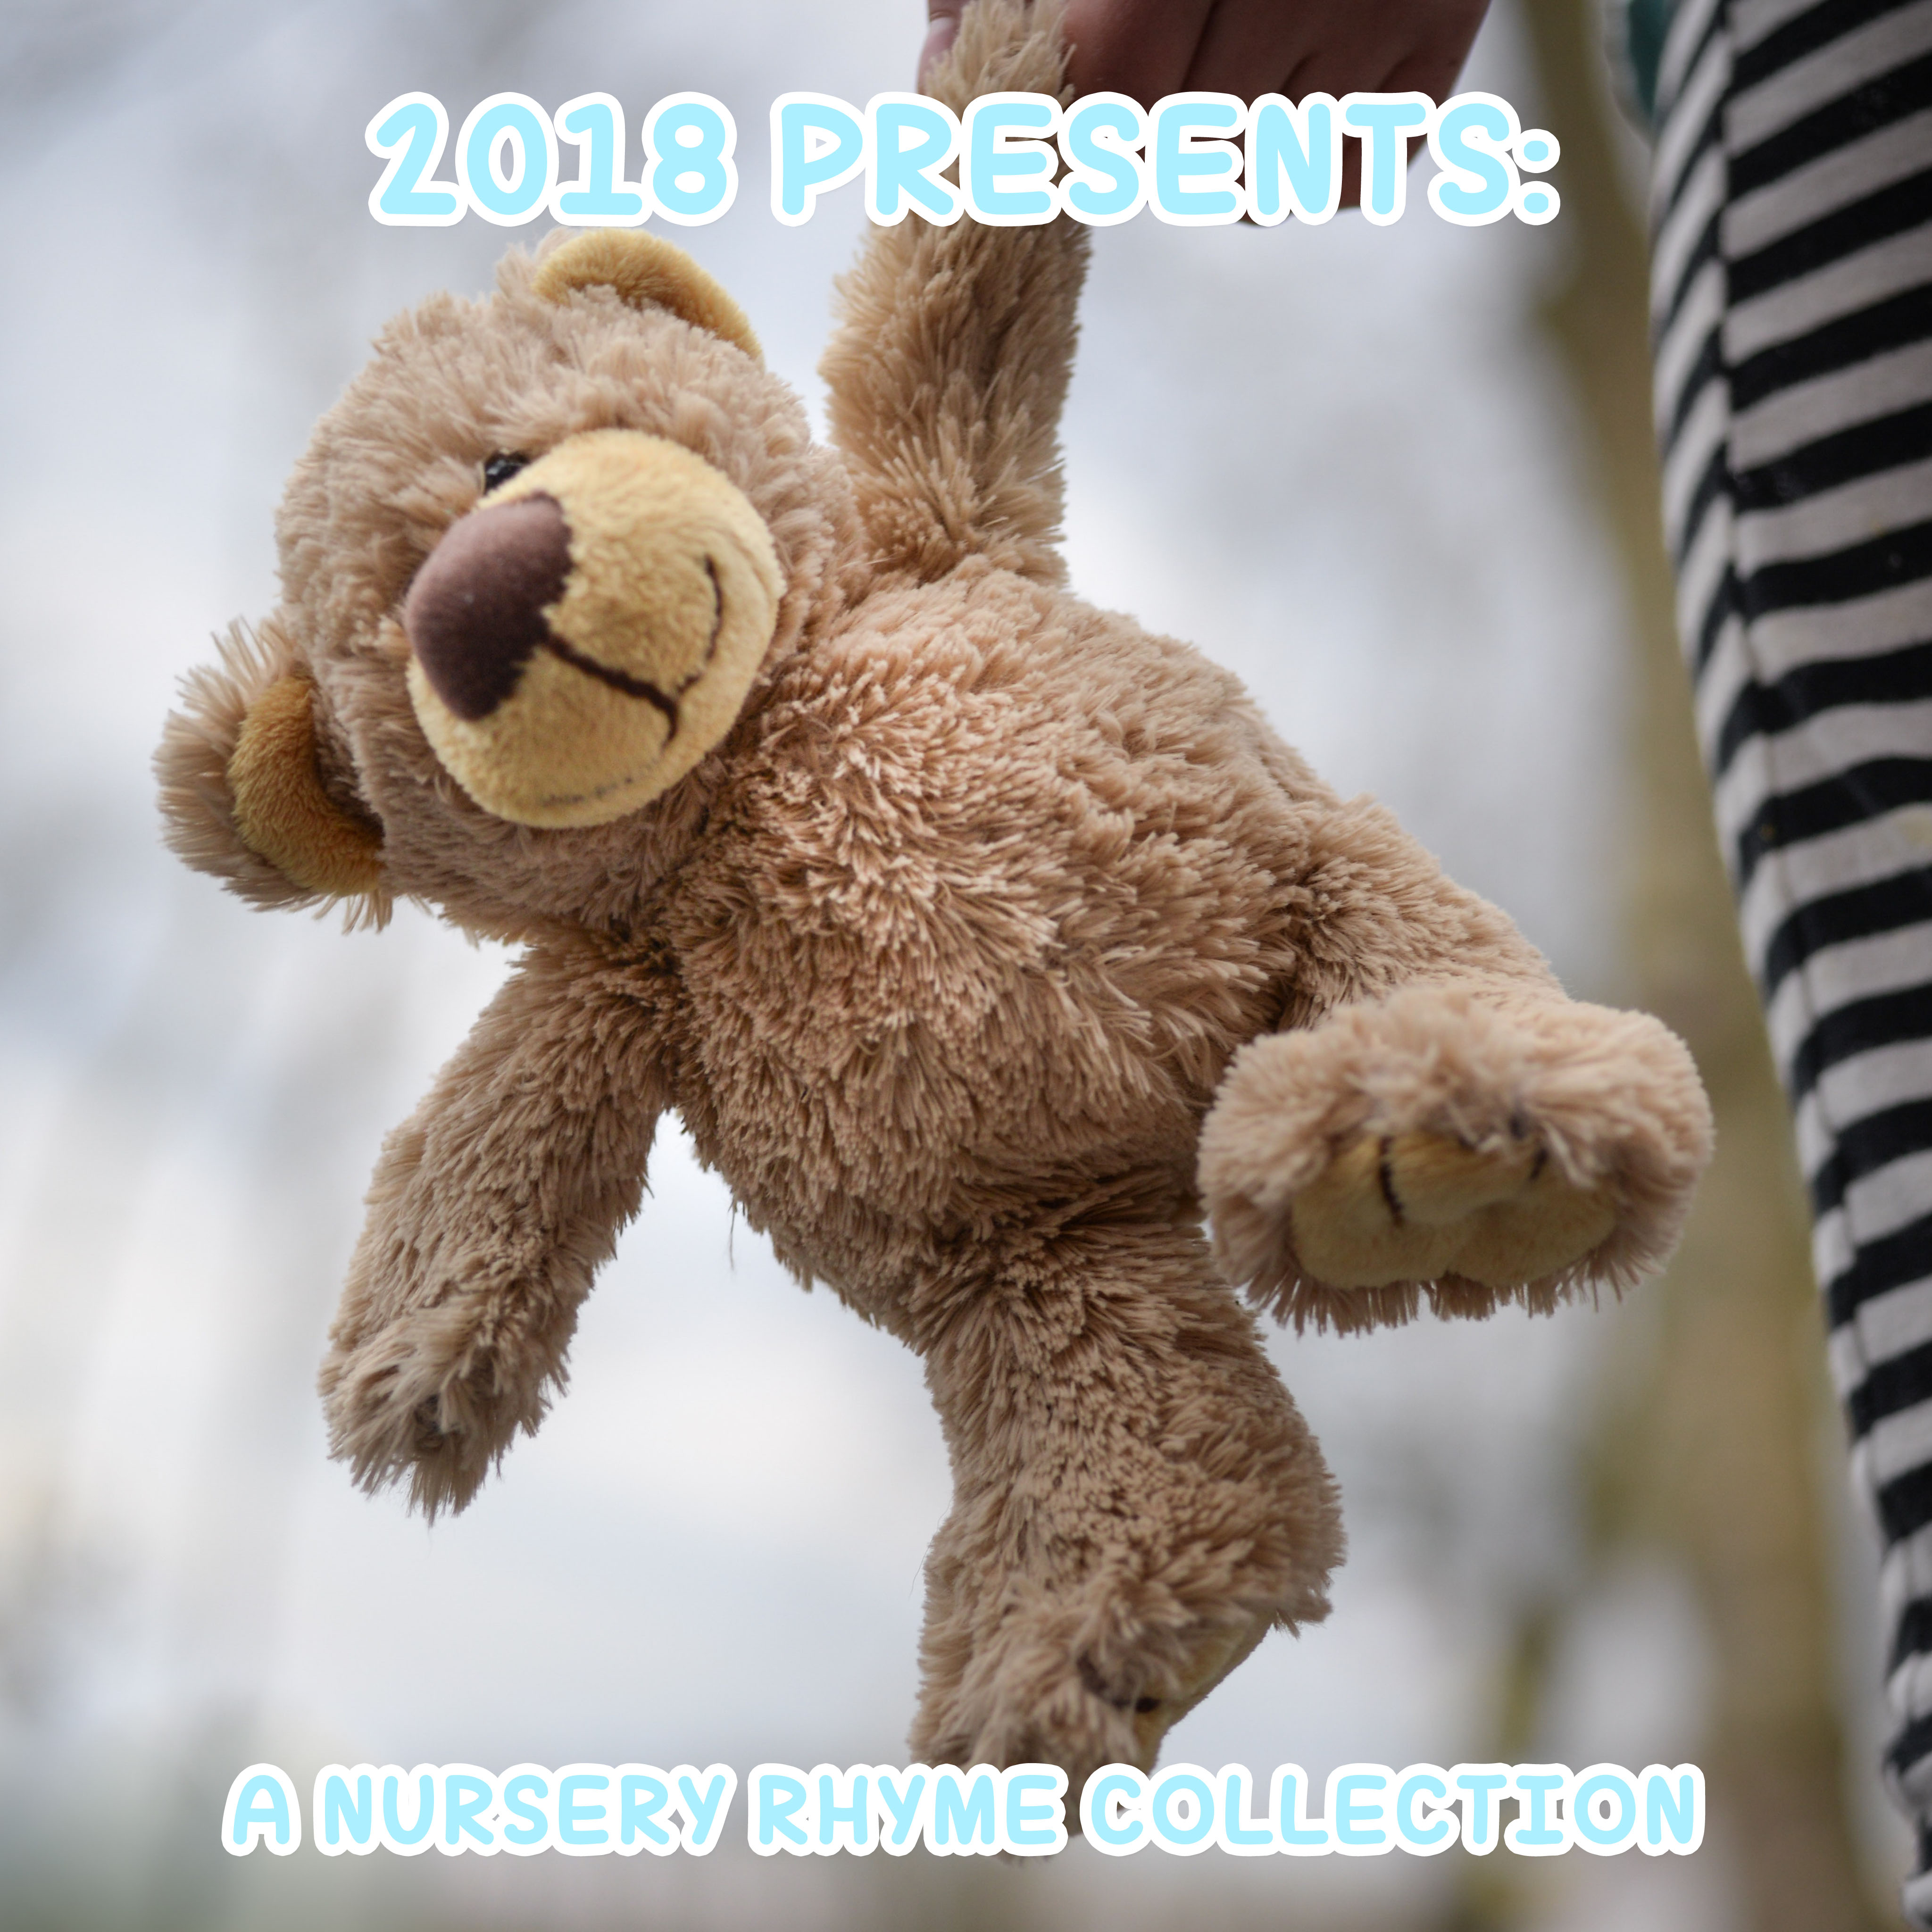 2018 Presents: A Nursery Rhyme Collection